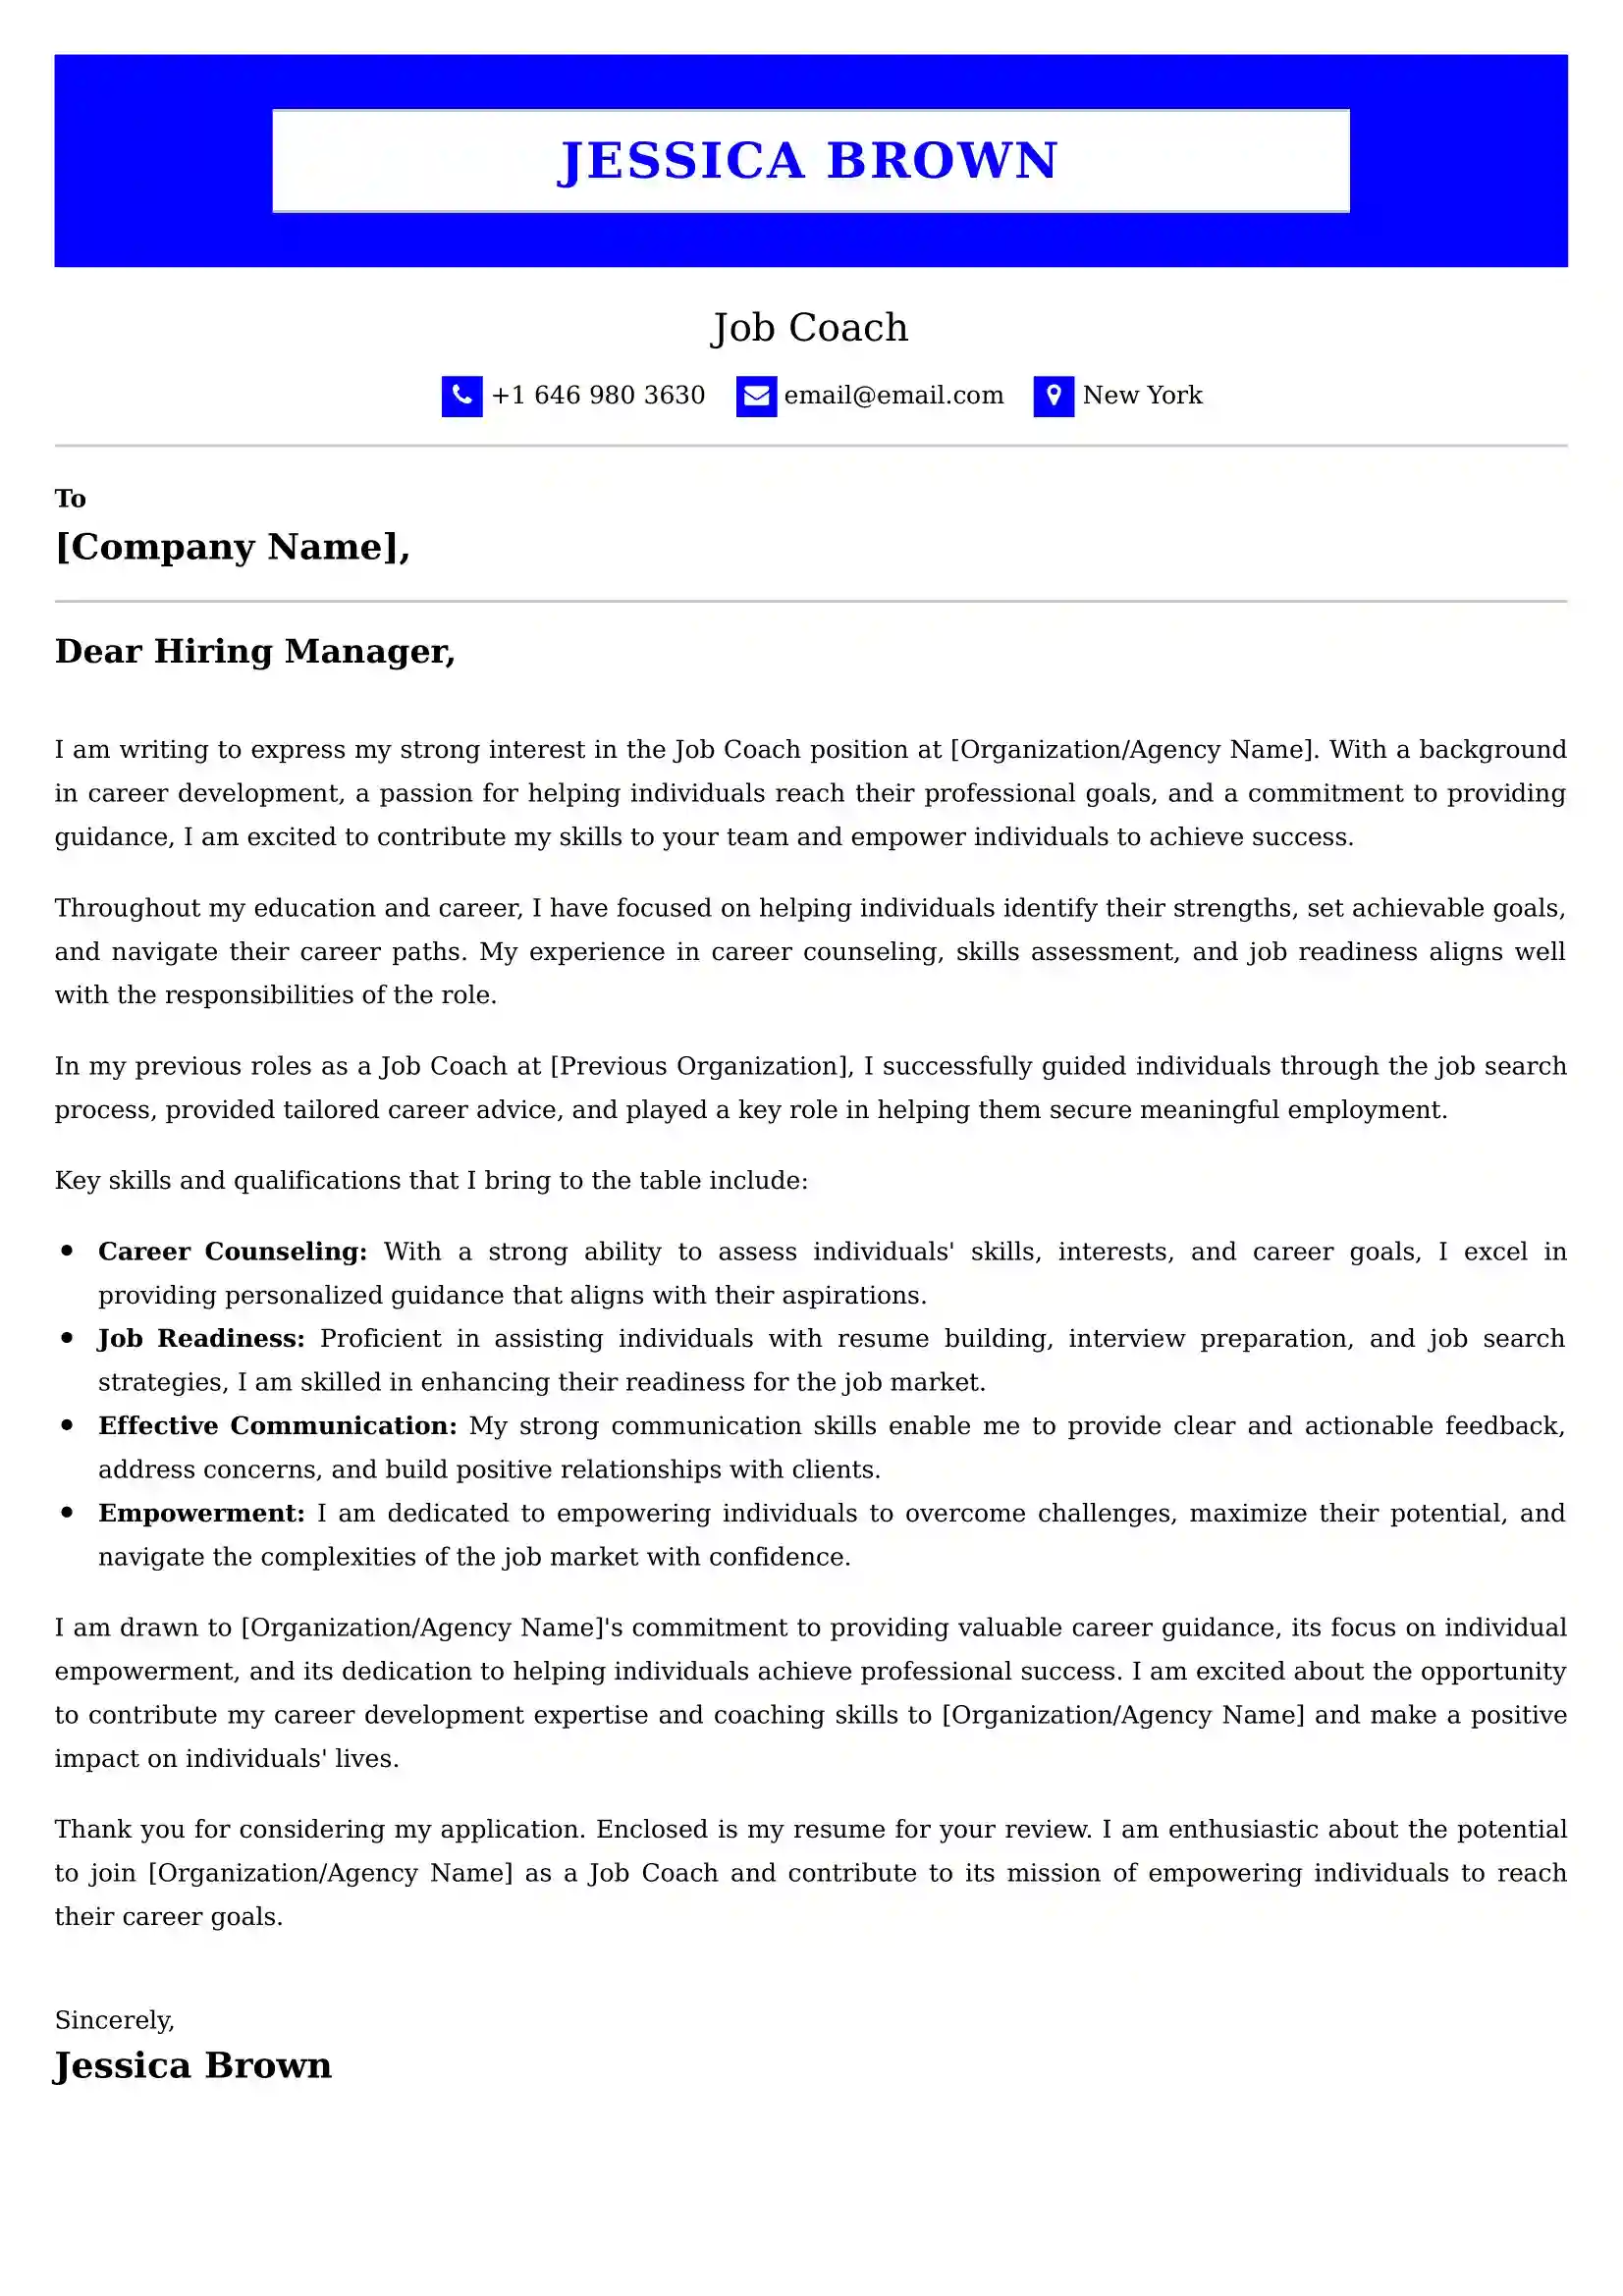 Job Coach Cover Letter Examples - Latest UK Format